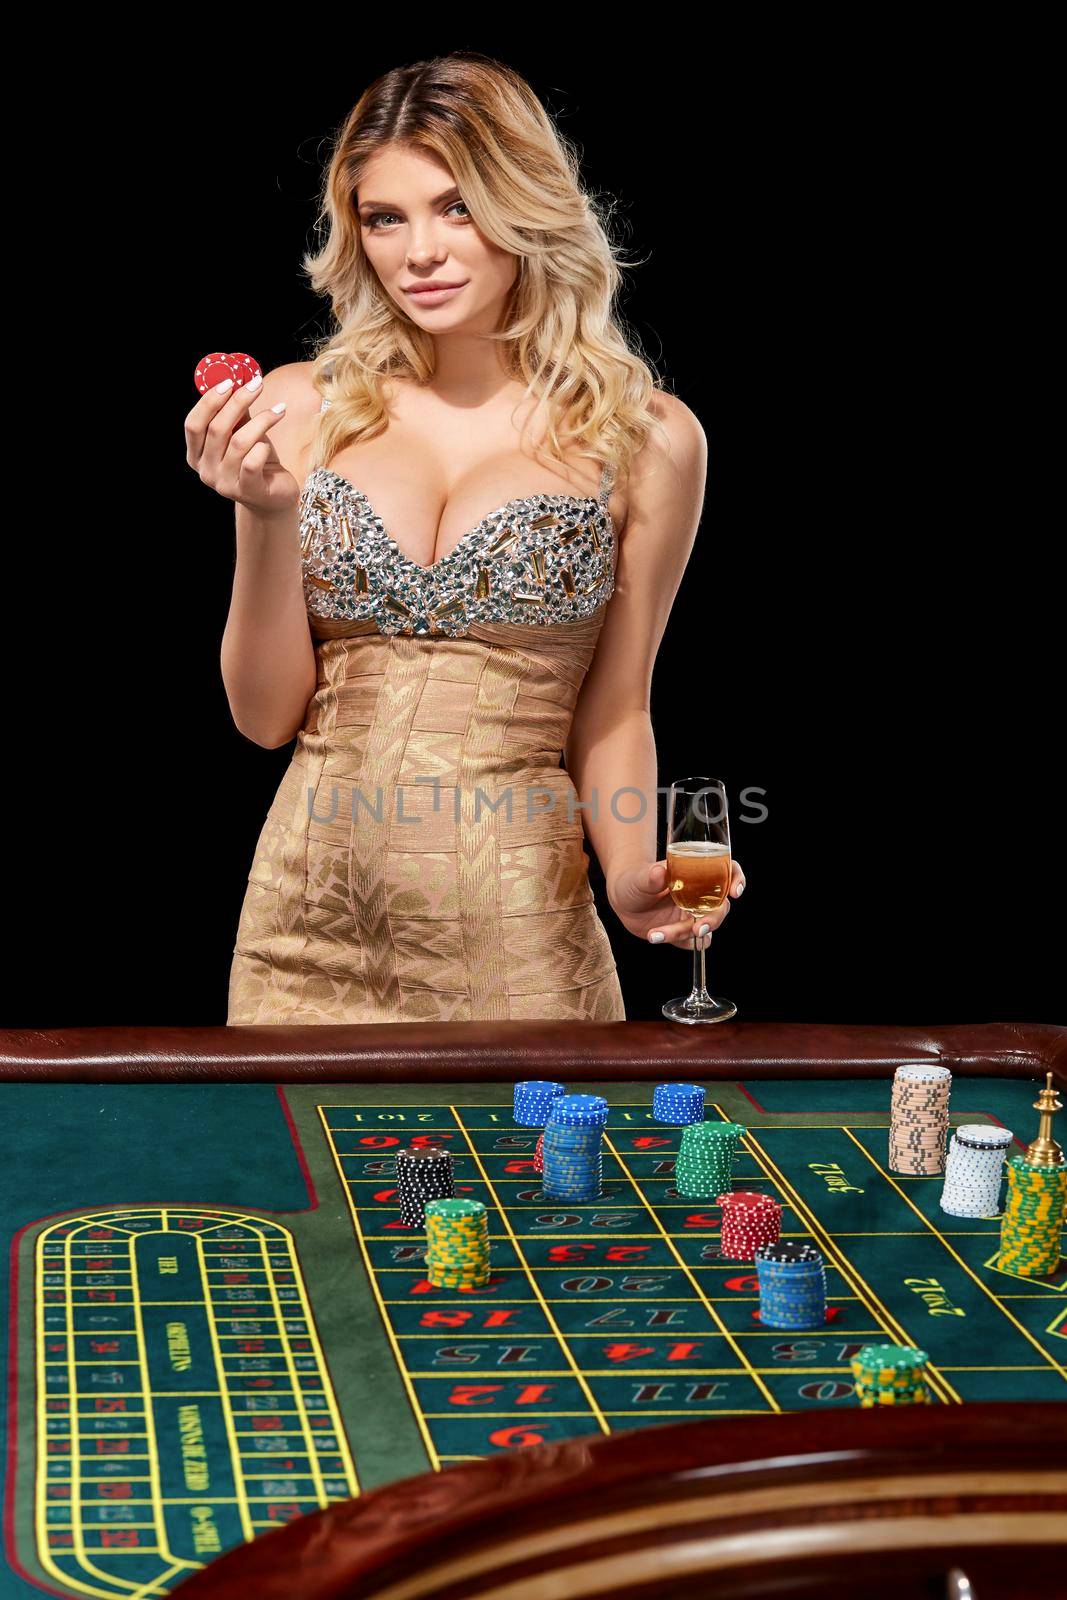 woman in a smart dress plays roulette. by nazarovsergey